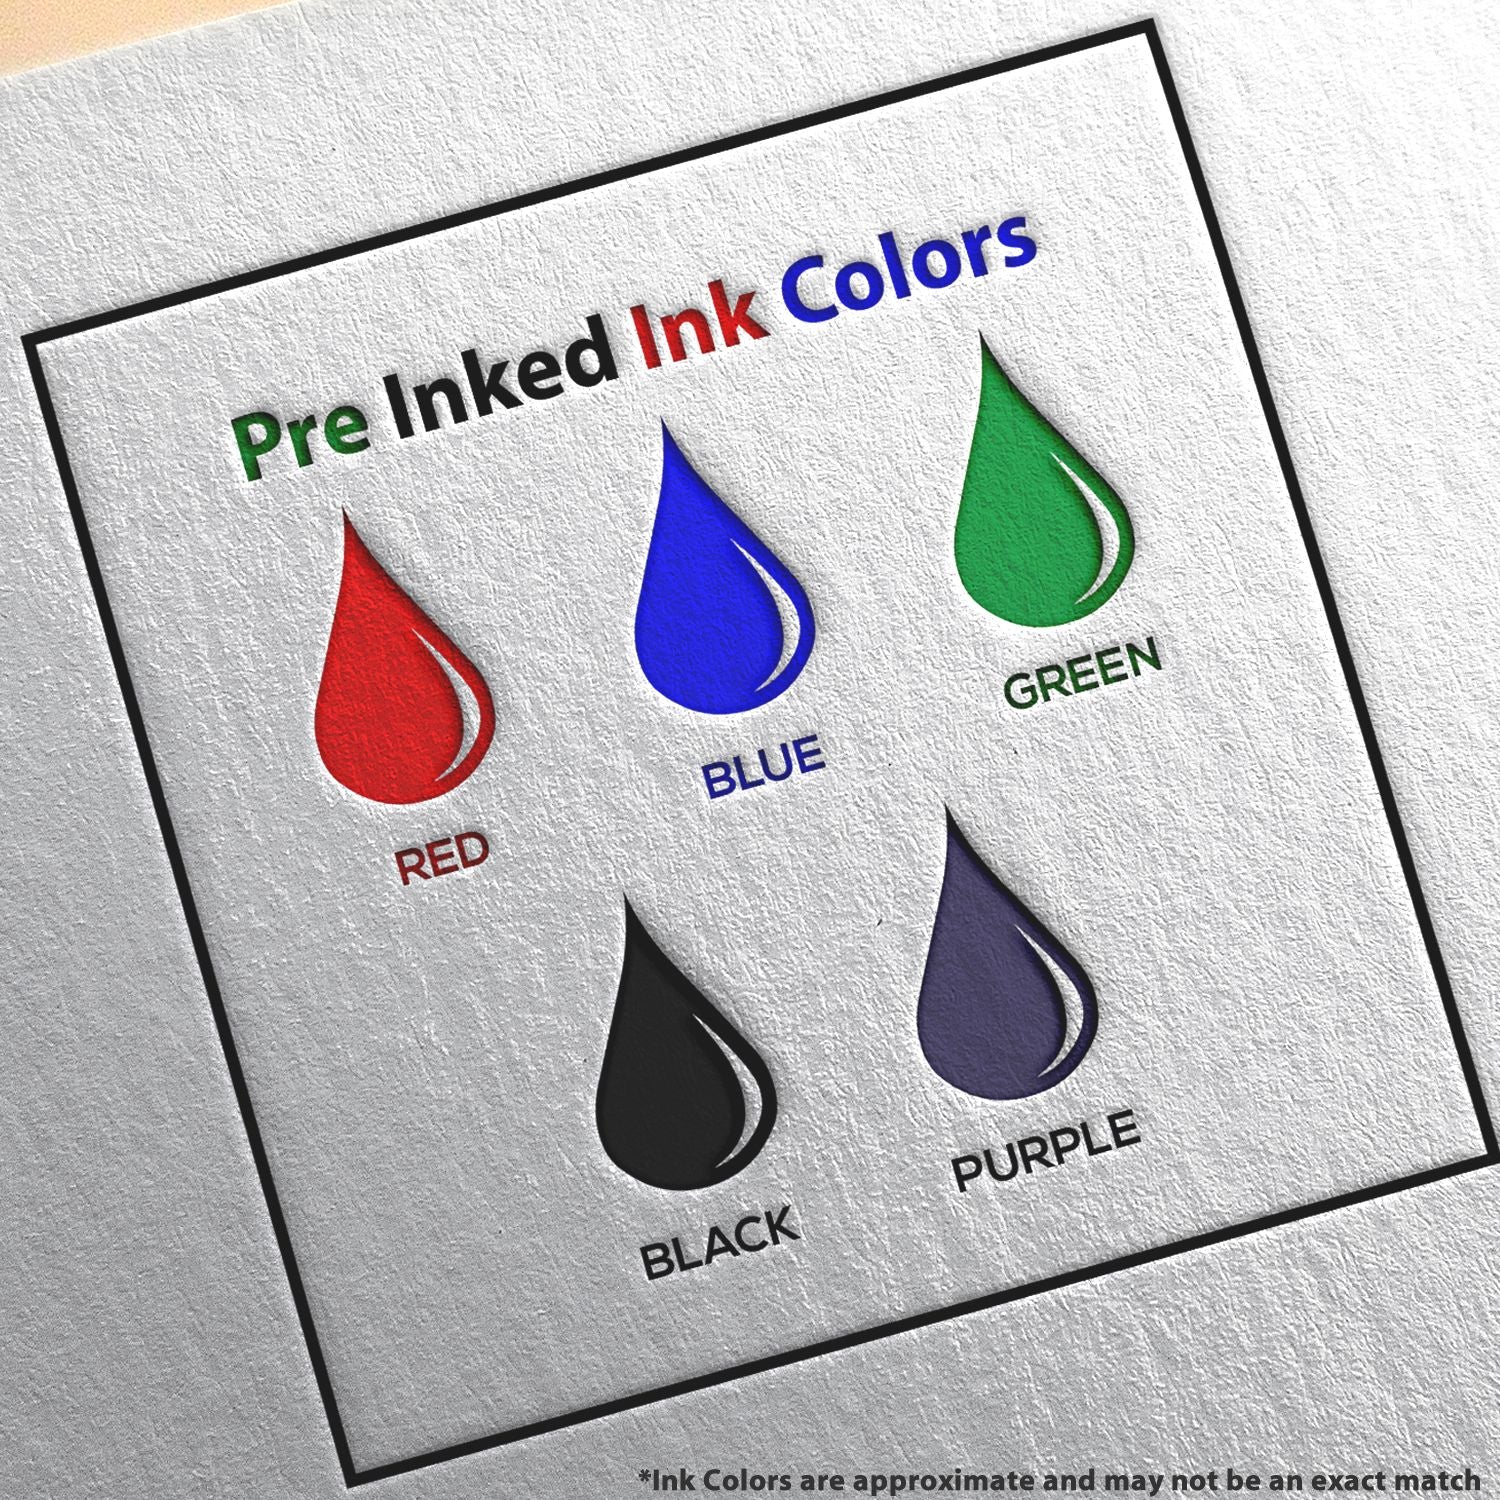 A picture showing the different ink colors or hues available for the Premium MaxLight Pre-Inked Puerto Rico Engineering Stamp product.